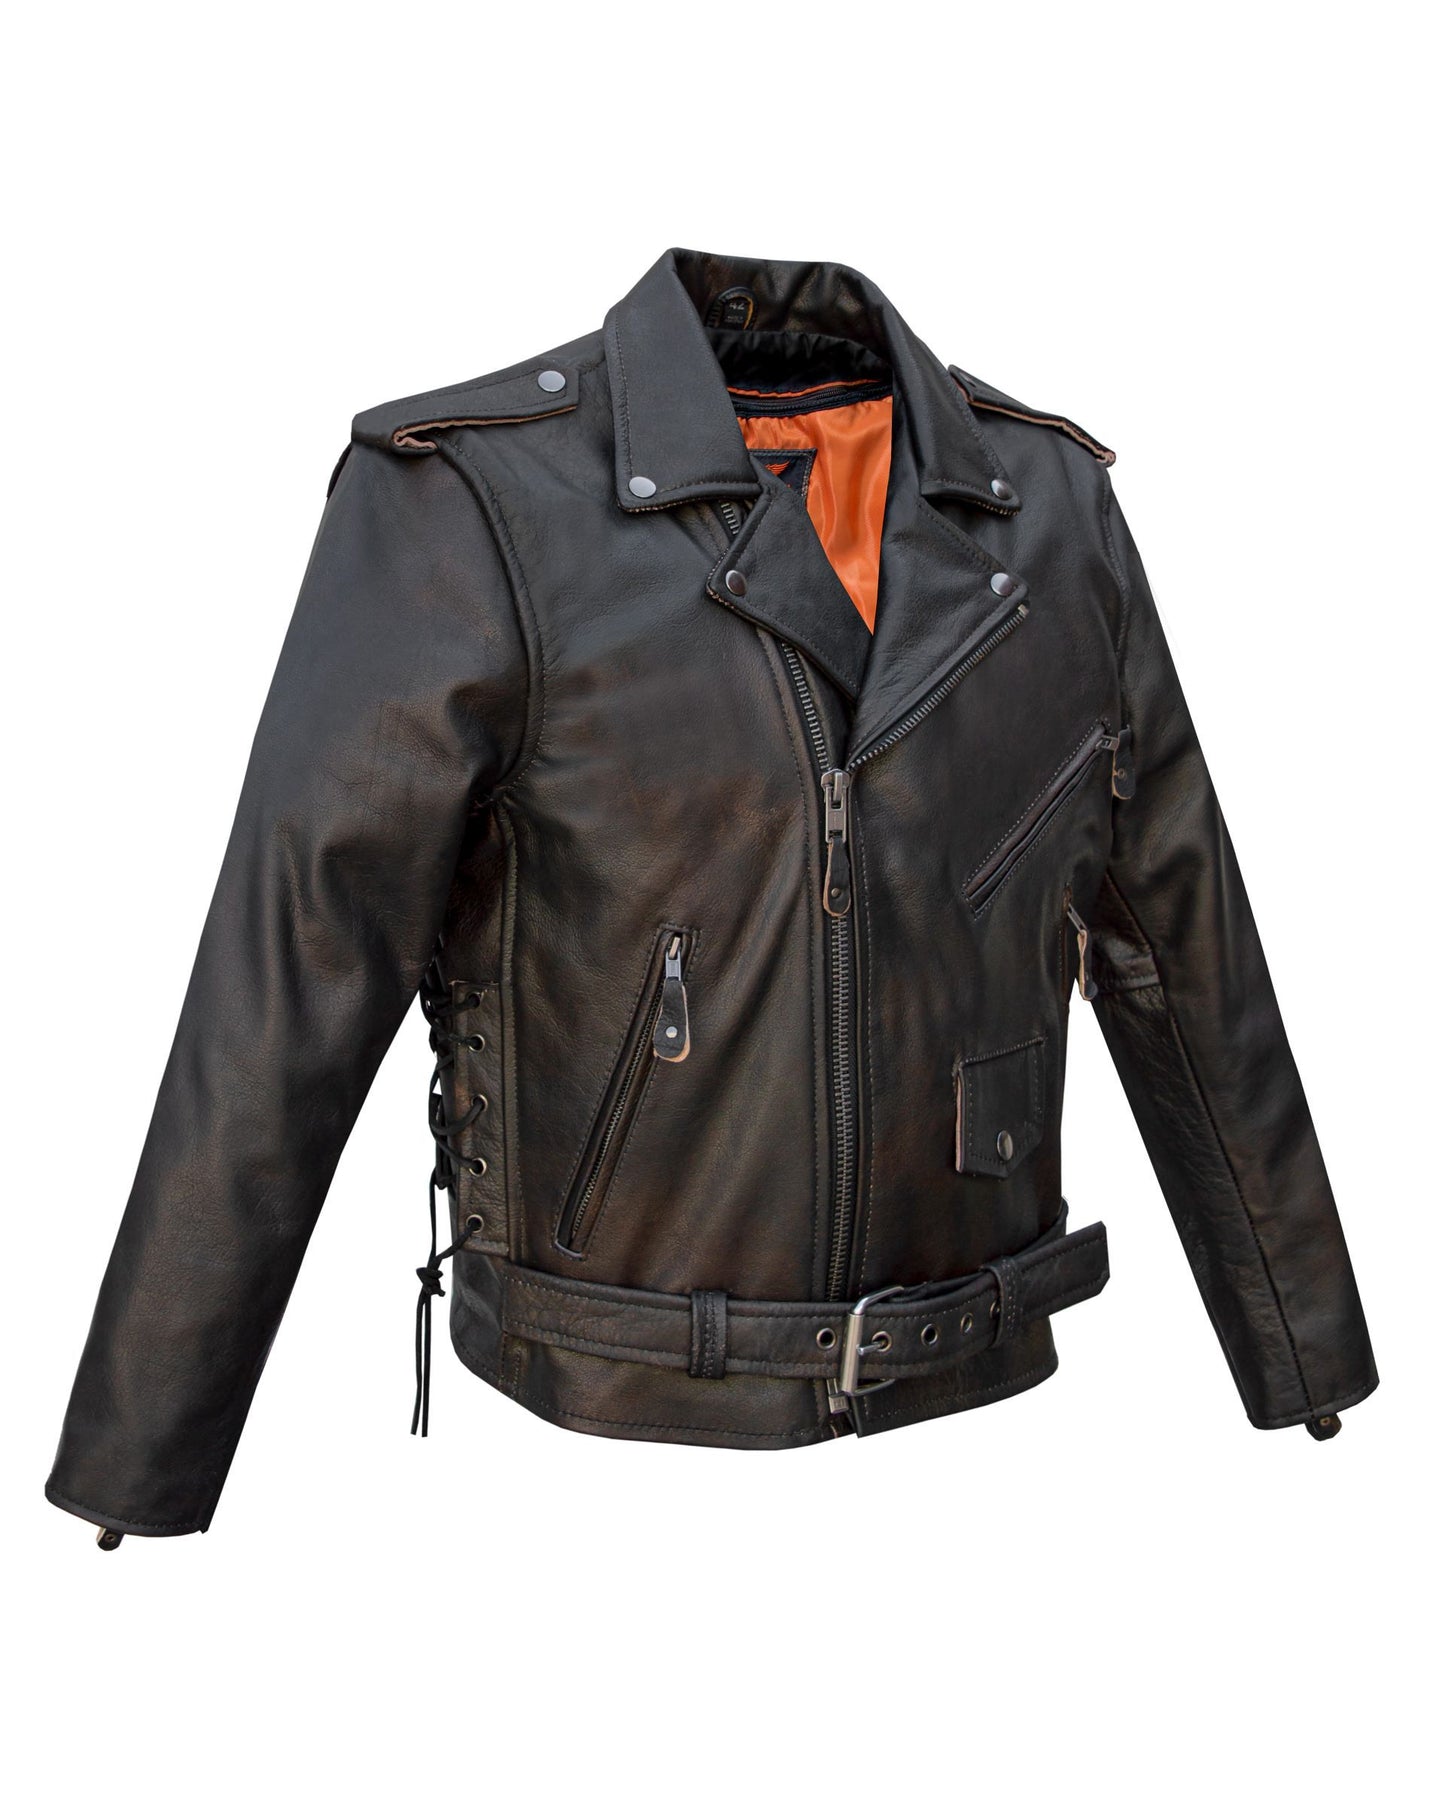 Men's Leather Motorcycle Jacket with Emboss Eagle, Live to Ride, Ride to Live